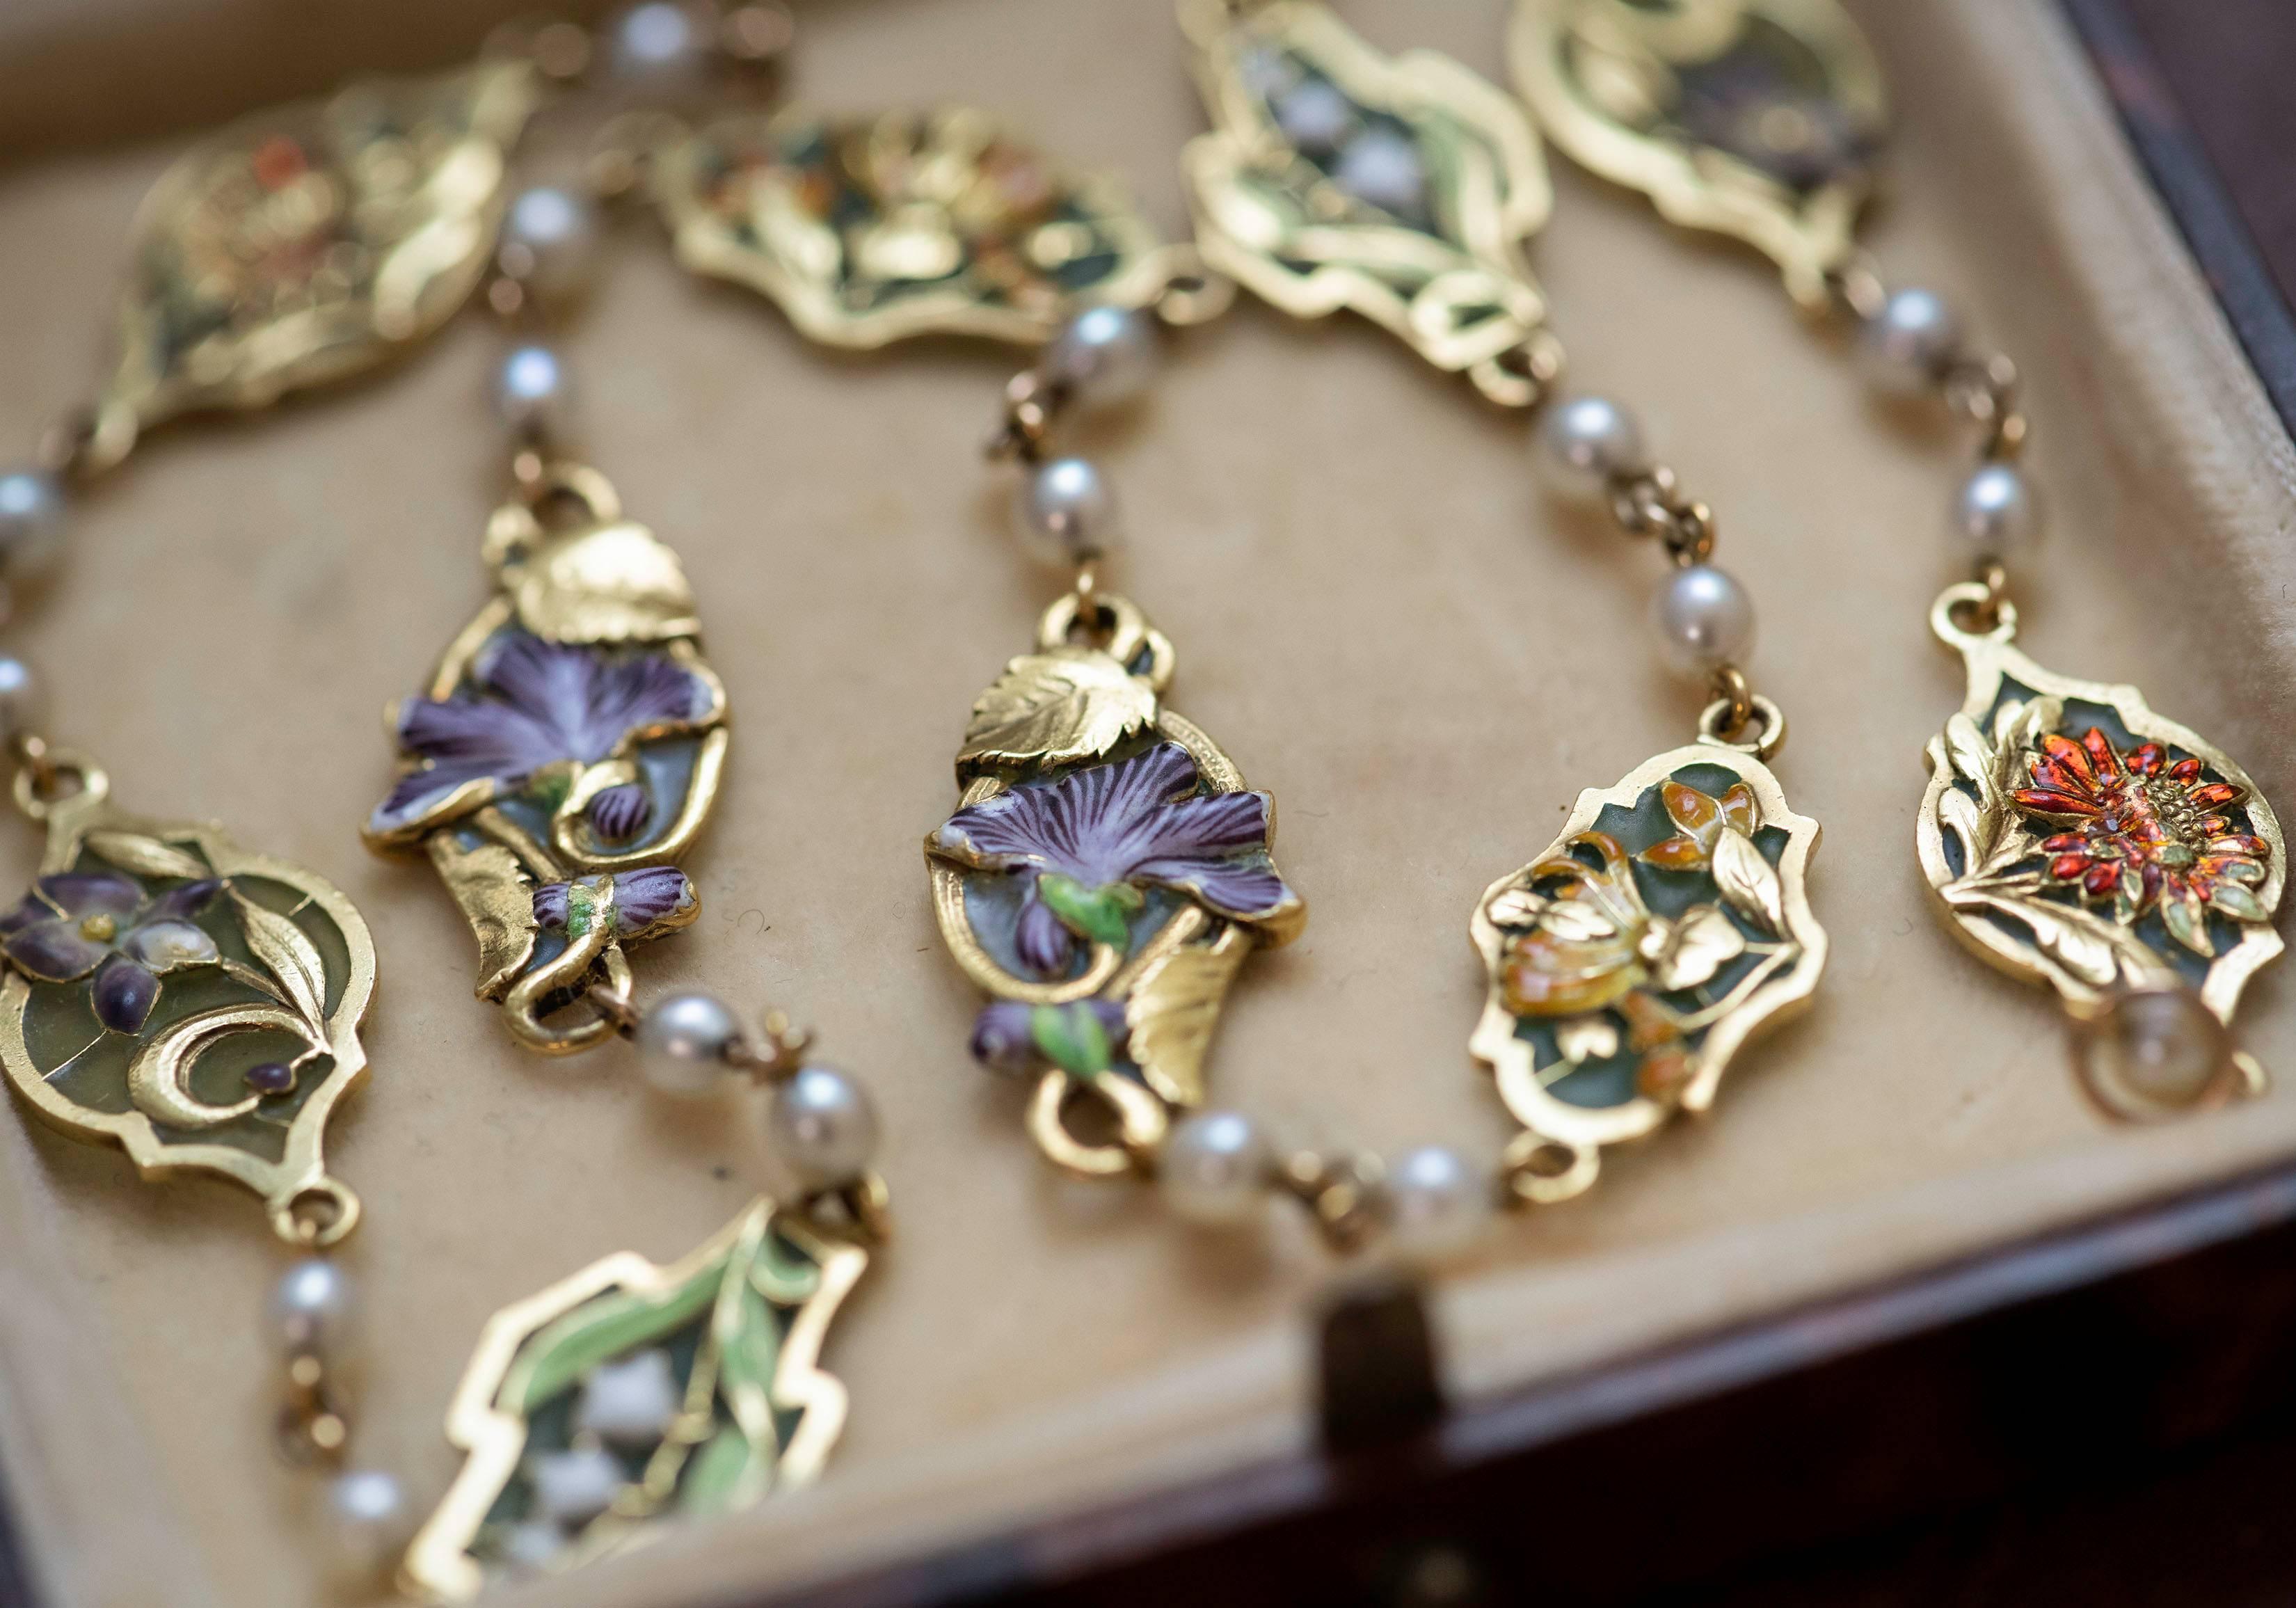 This elegant necklace shows three different types of flowers which my knowledge of horticulture is not up to identifying. They are however very pretty flowers, arranged in such a way as to show the flowing Art Nouveau shapes. Each segment is framed